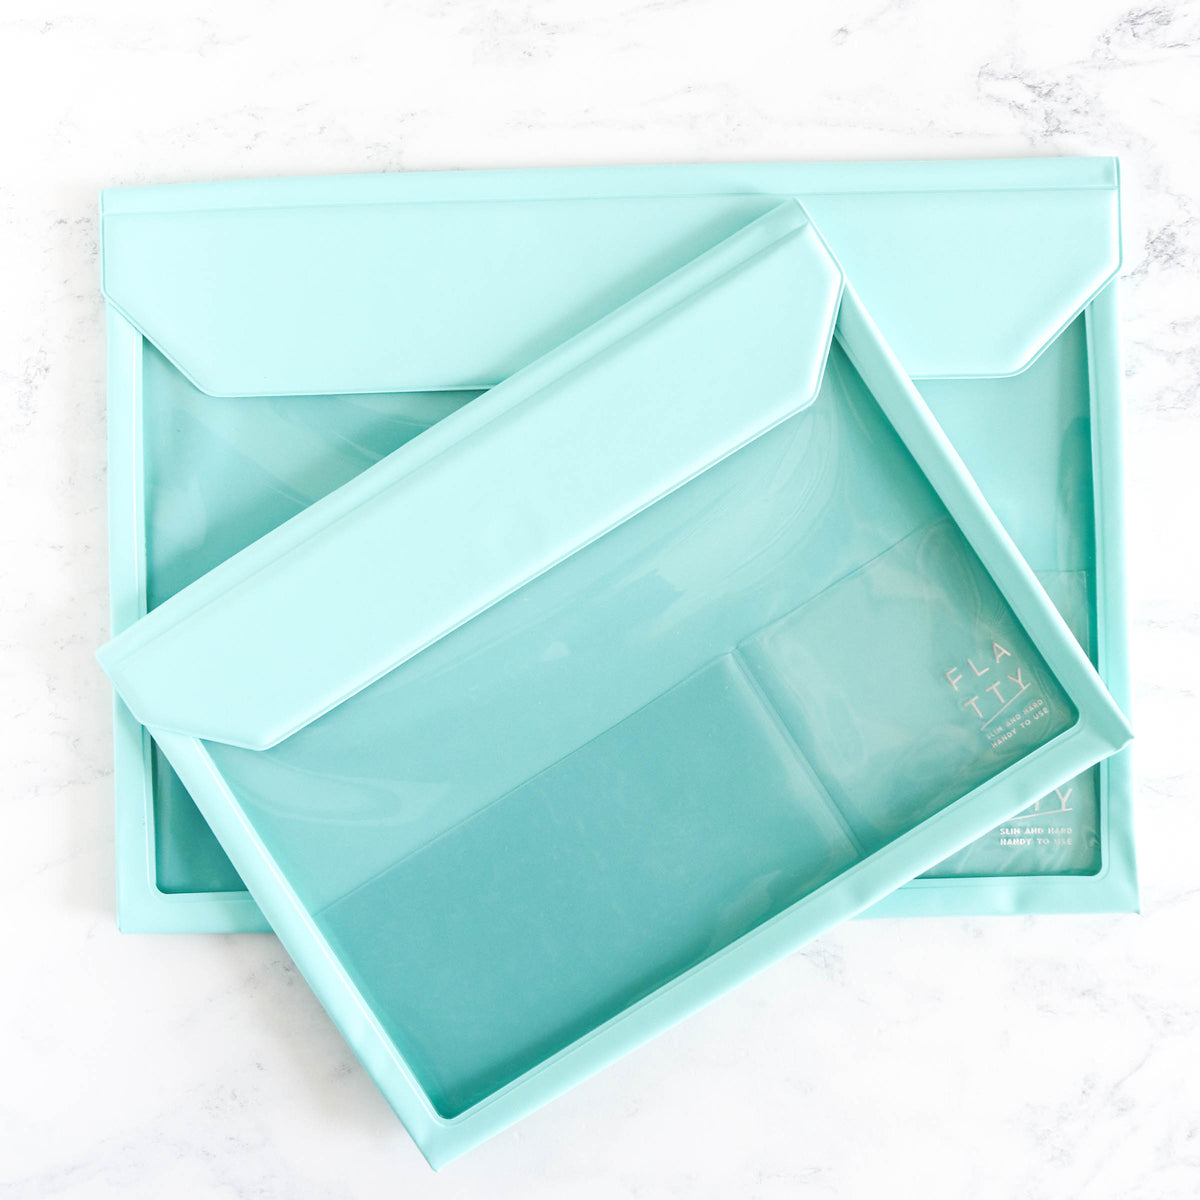 Flatty Project Carrying Case - Mint Green